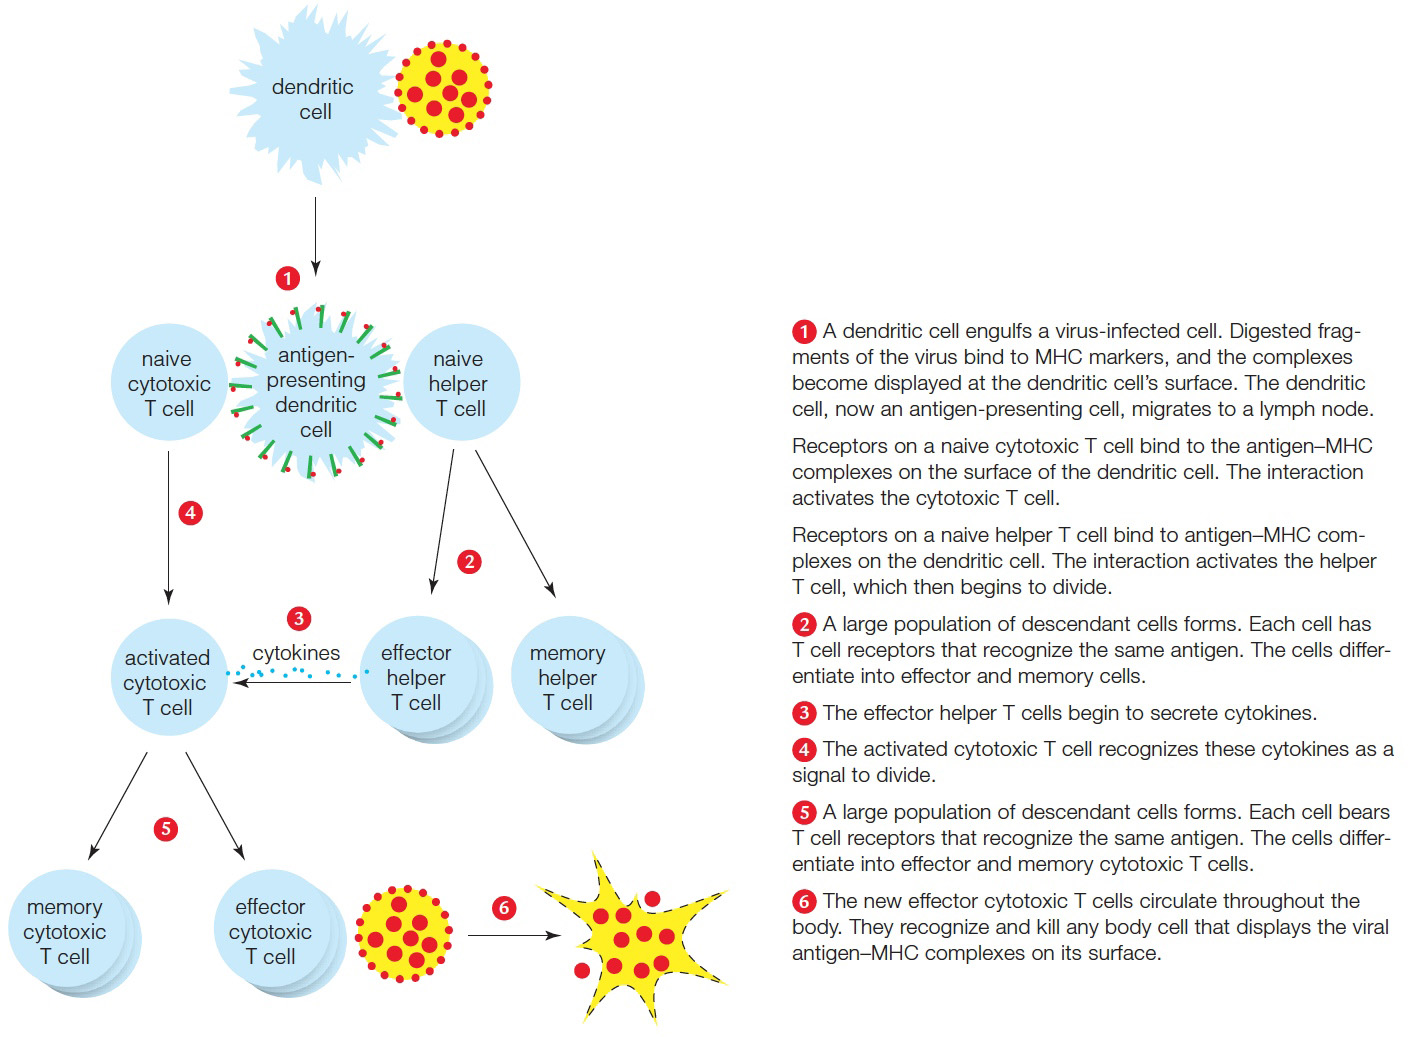 An example of a cell-mediated immune response targeting virus-infected cells.